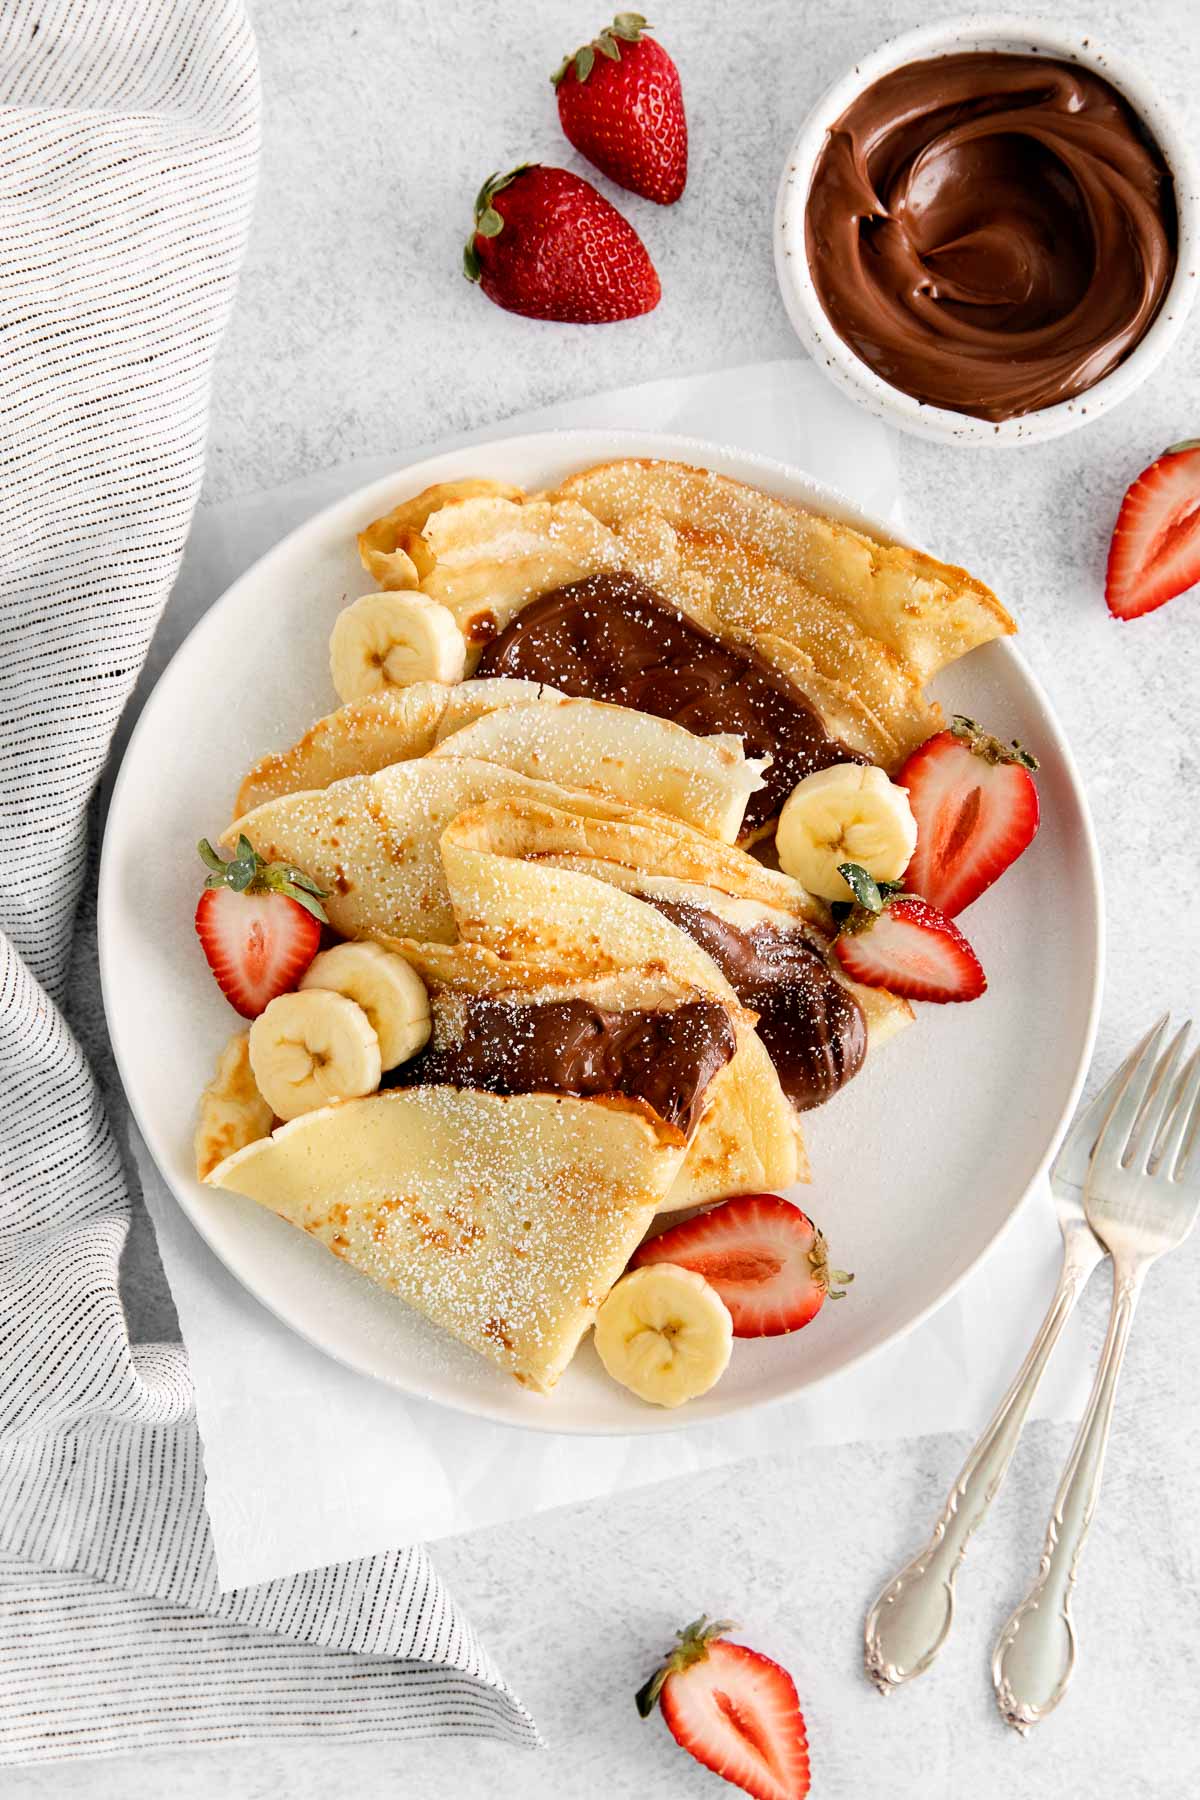 French crepes folded and filled with Nutella on a plate